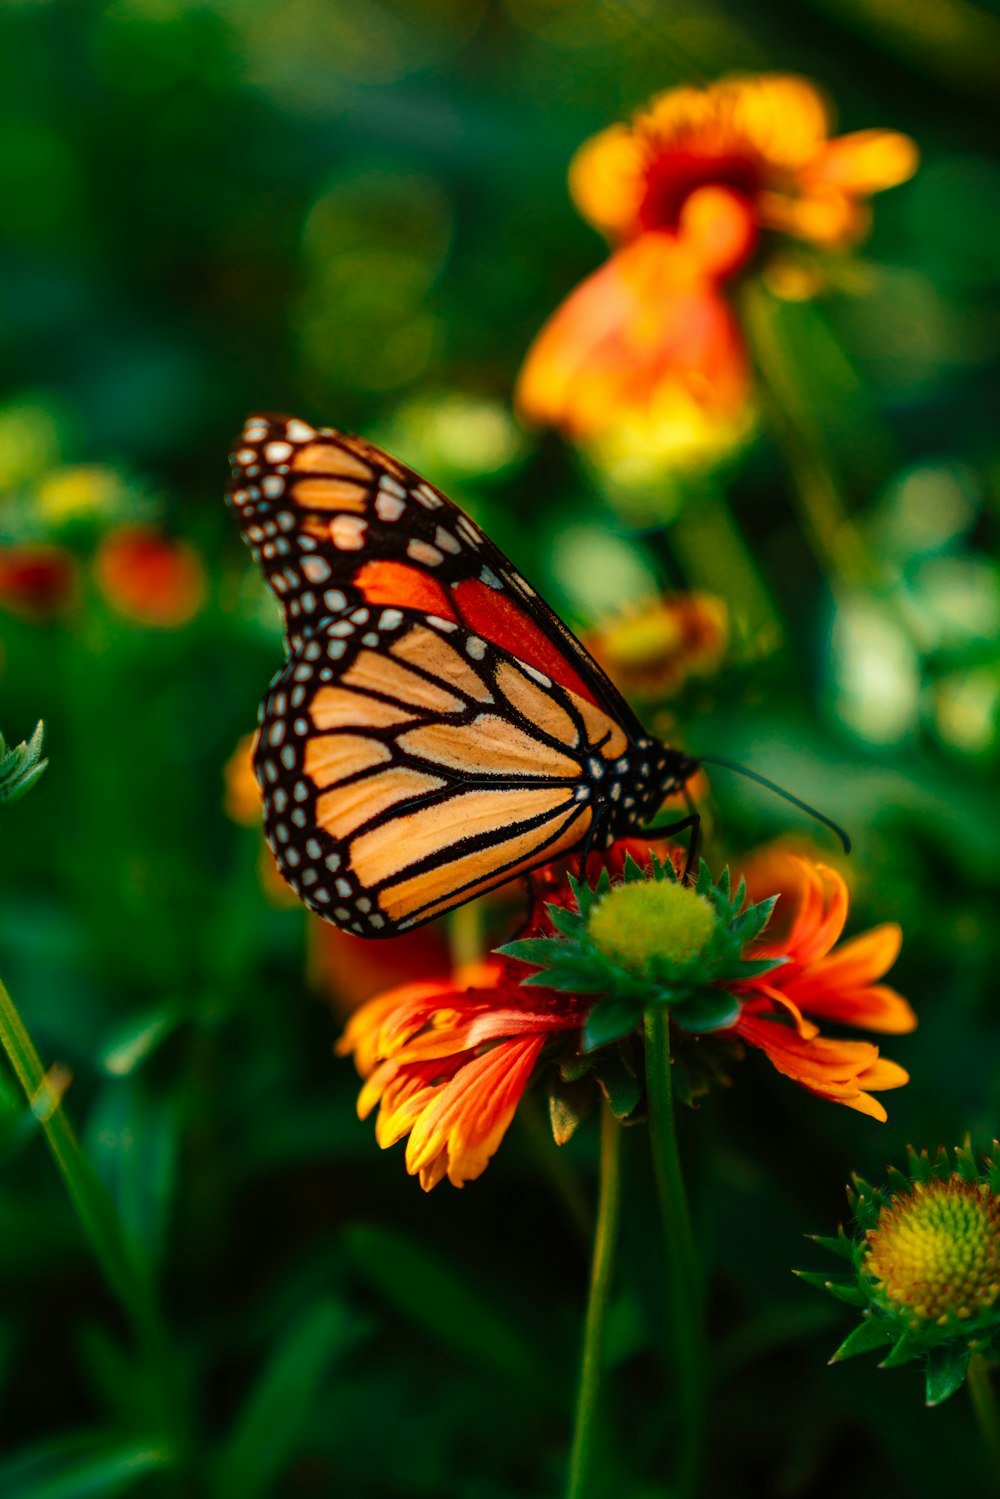 Monarch butterfly sitting atop an orange and red garden flower.